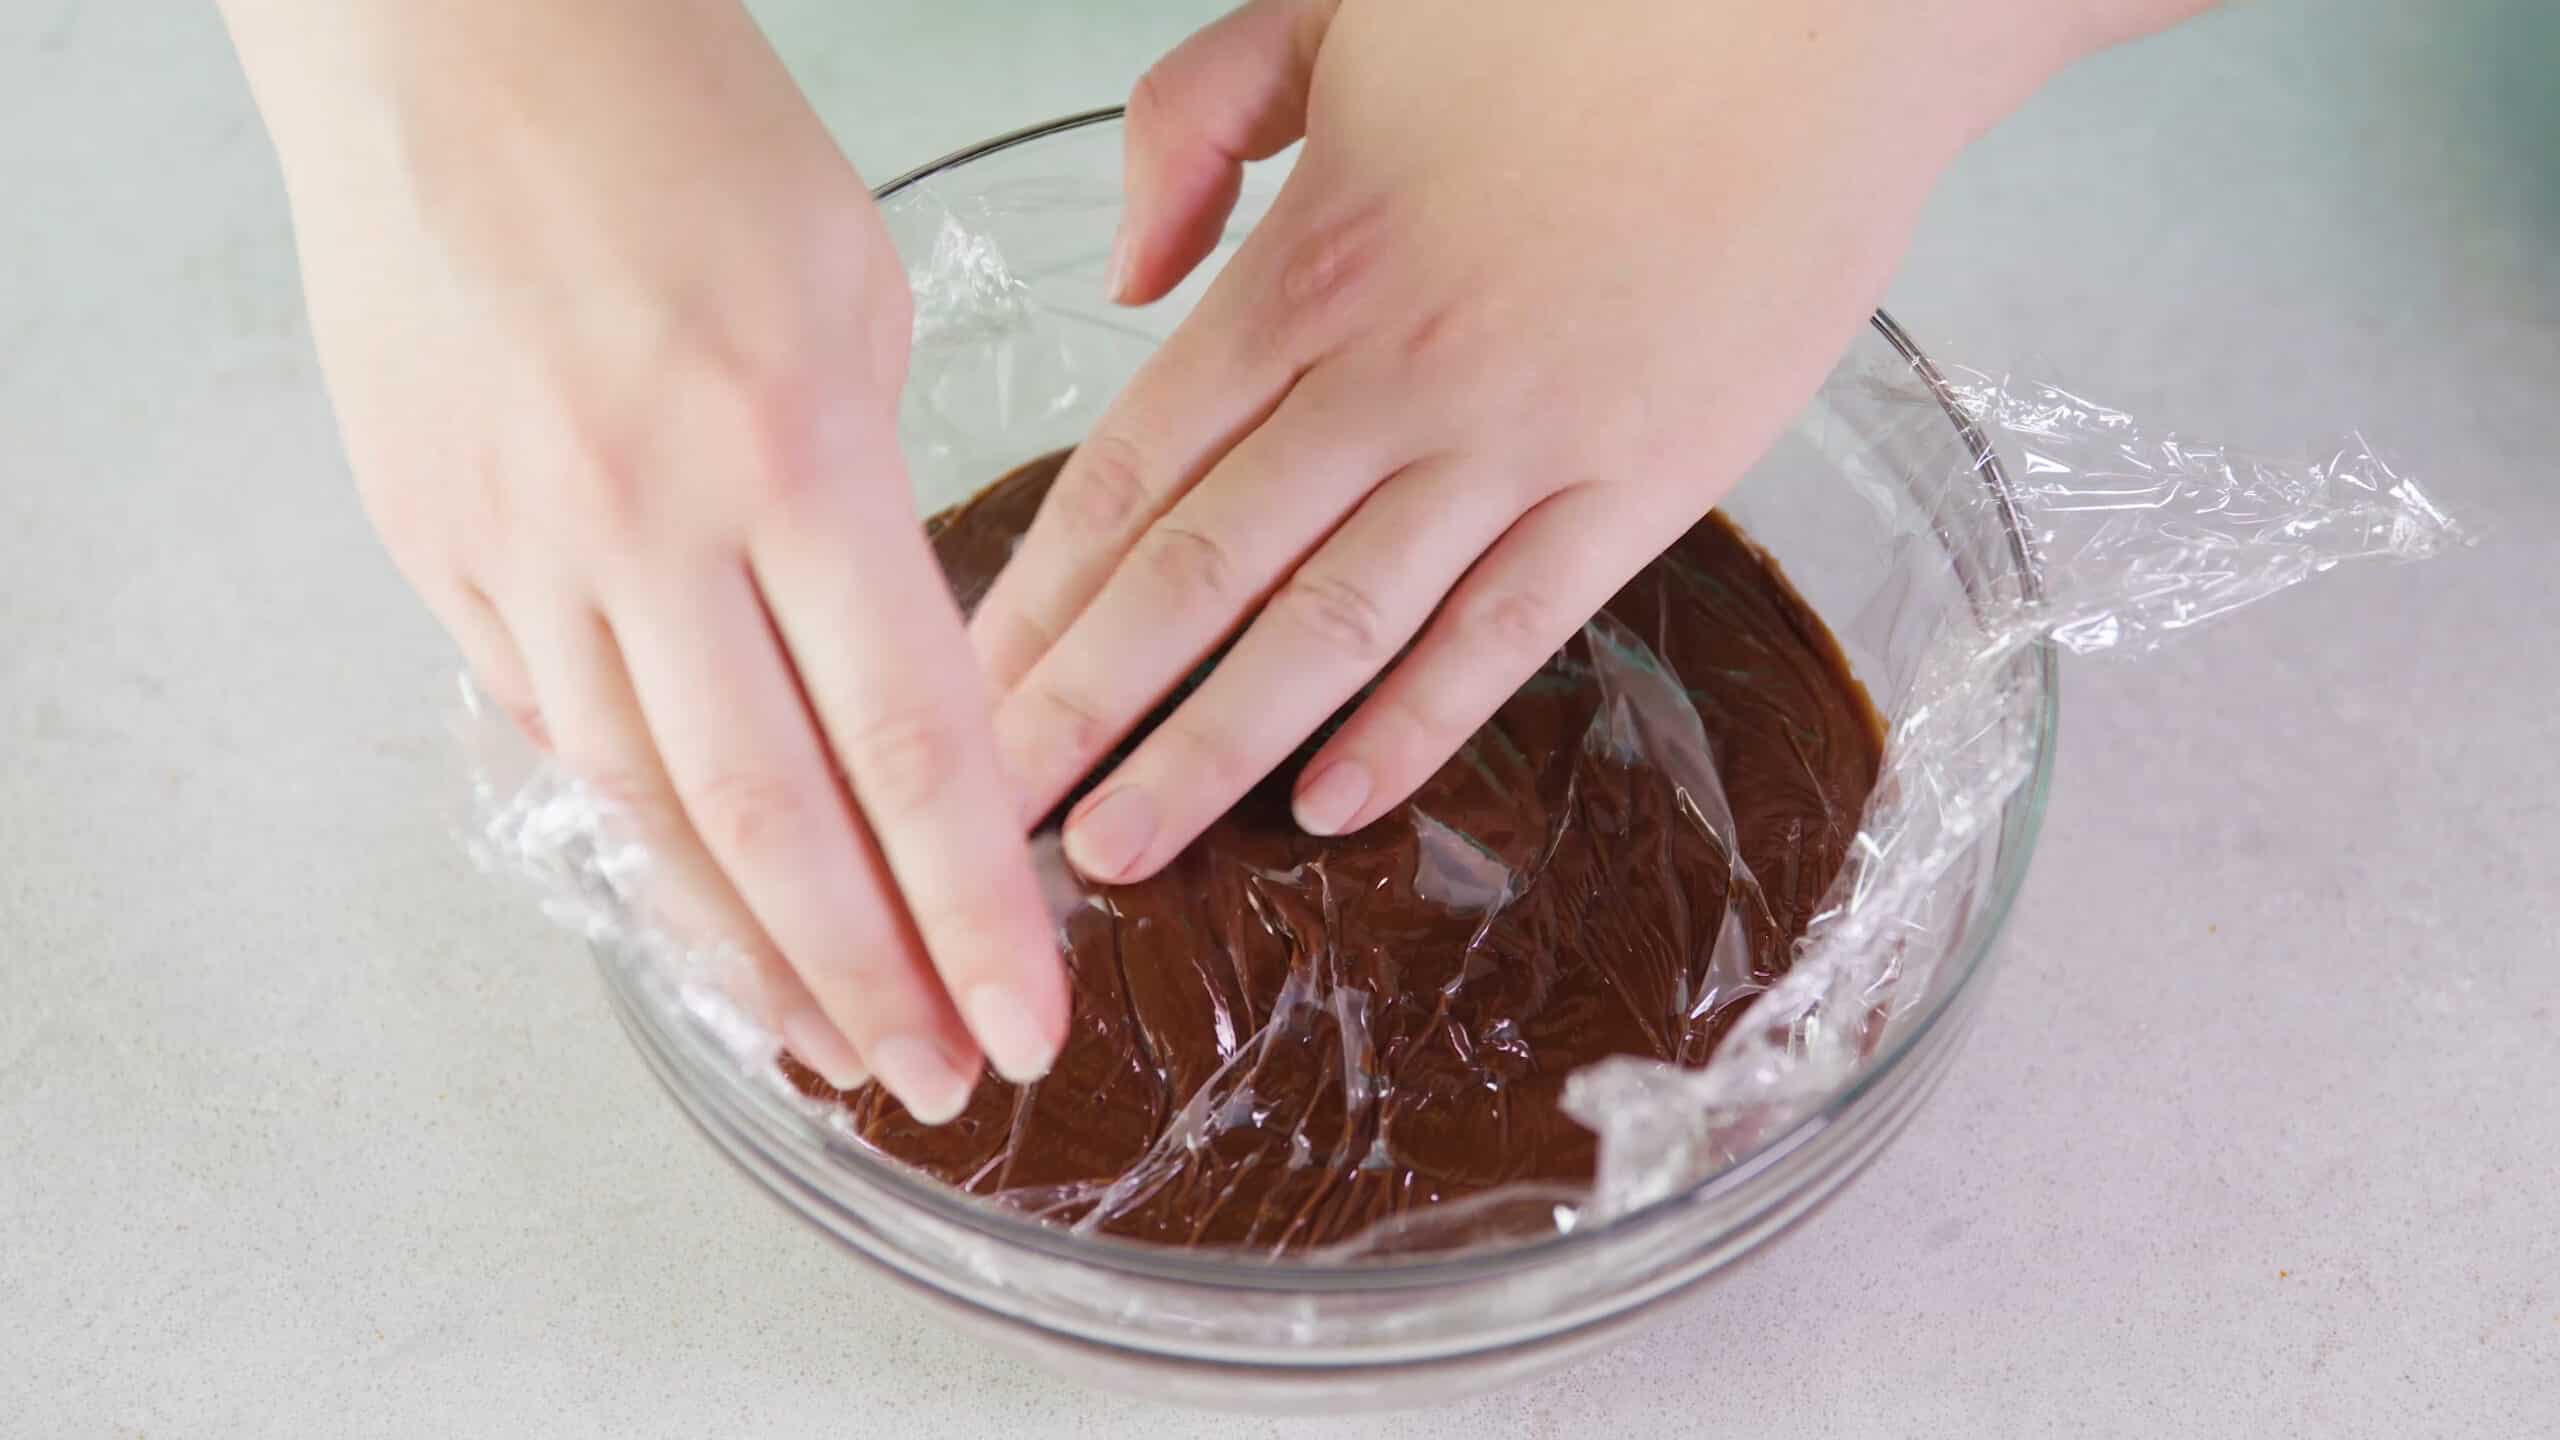 Overhead view of clear glass mixing bowl filled with chocolate pudding and clear plastic wrap smoothed over the top of the pudding to keep from exposure to air while in the fridge.